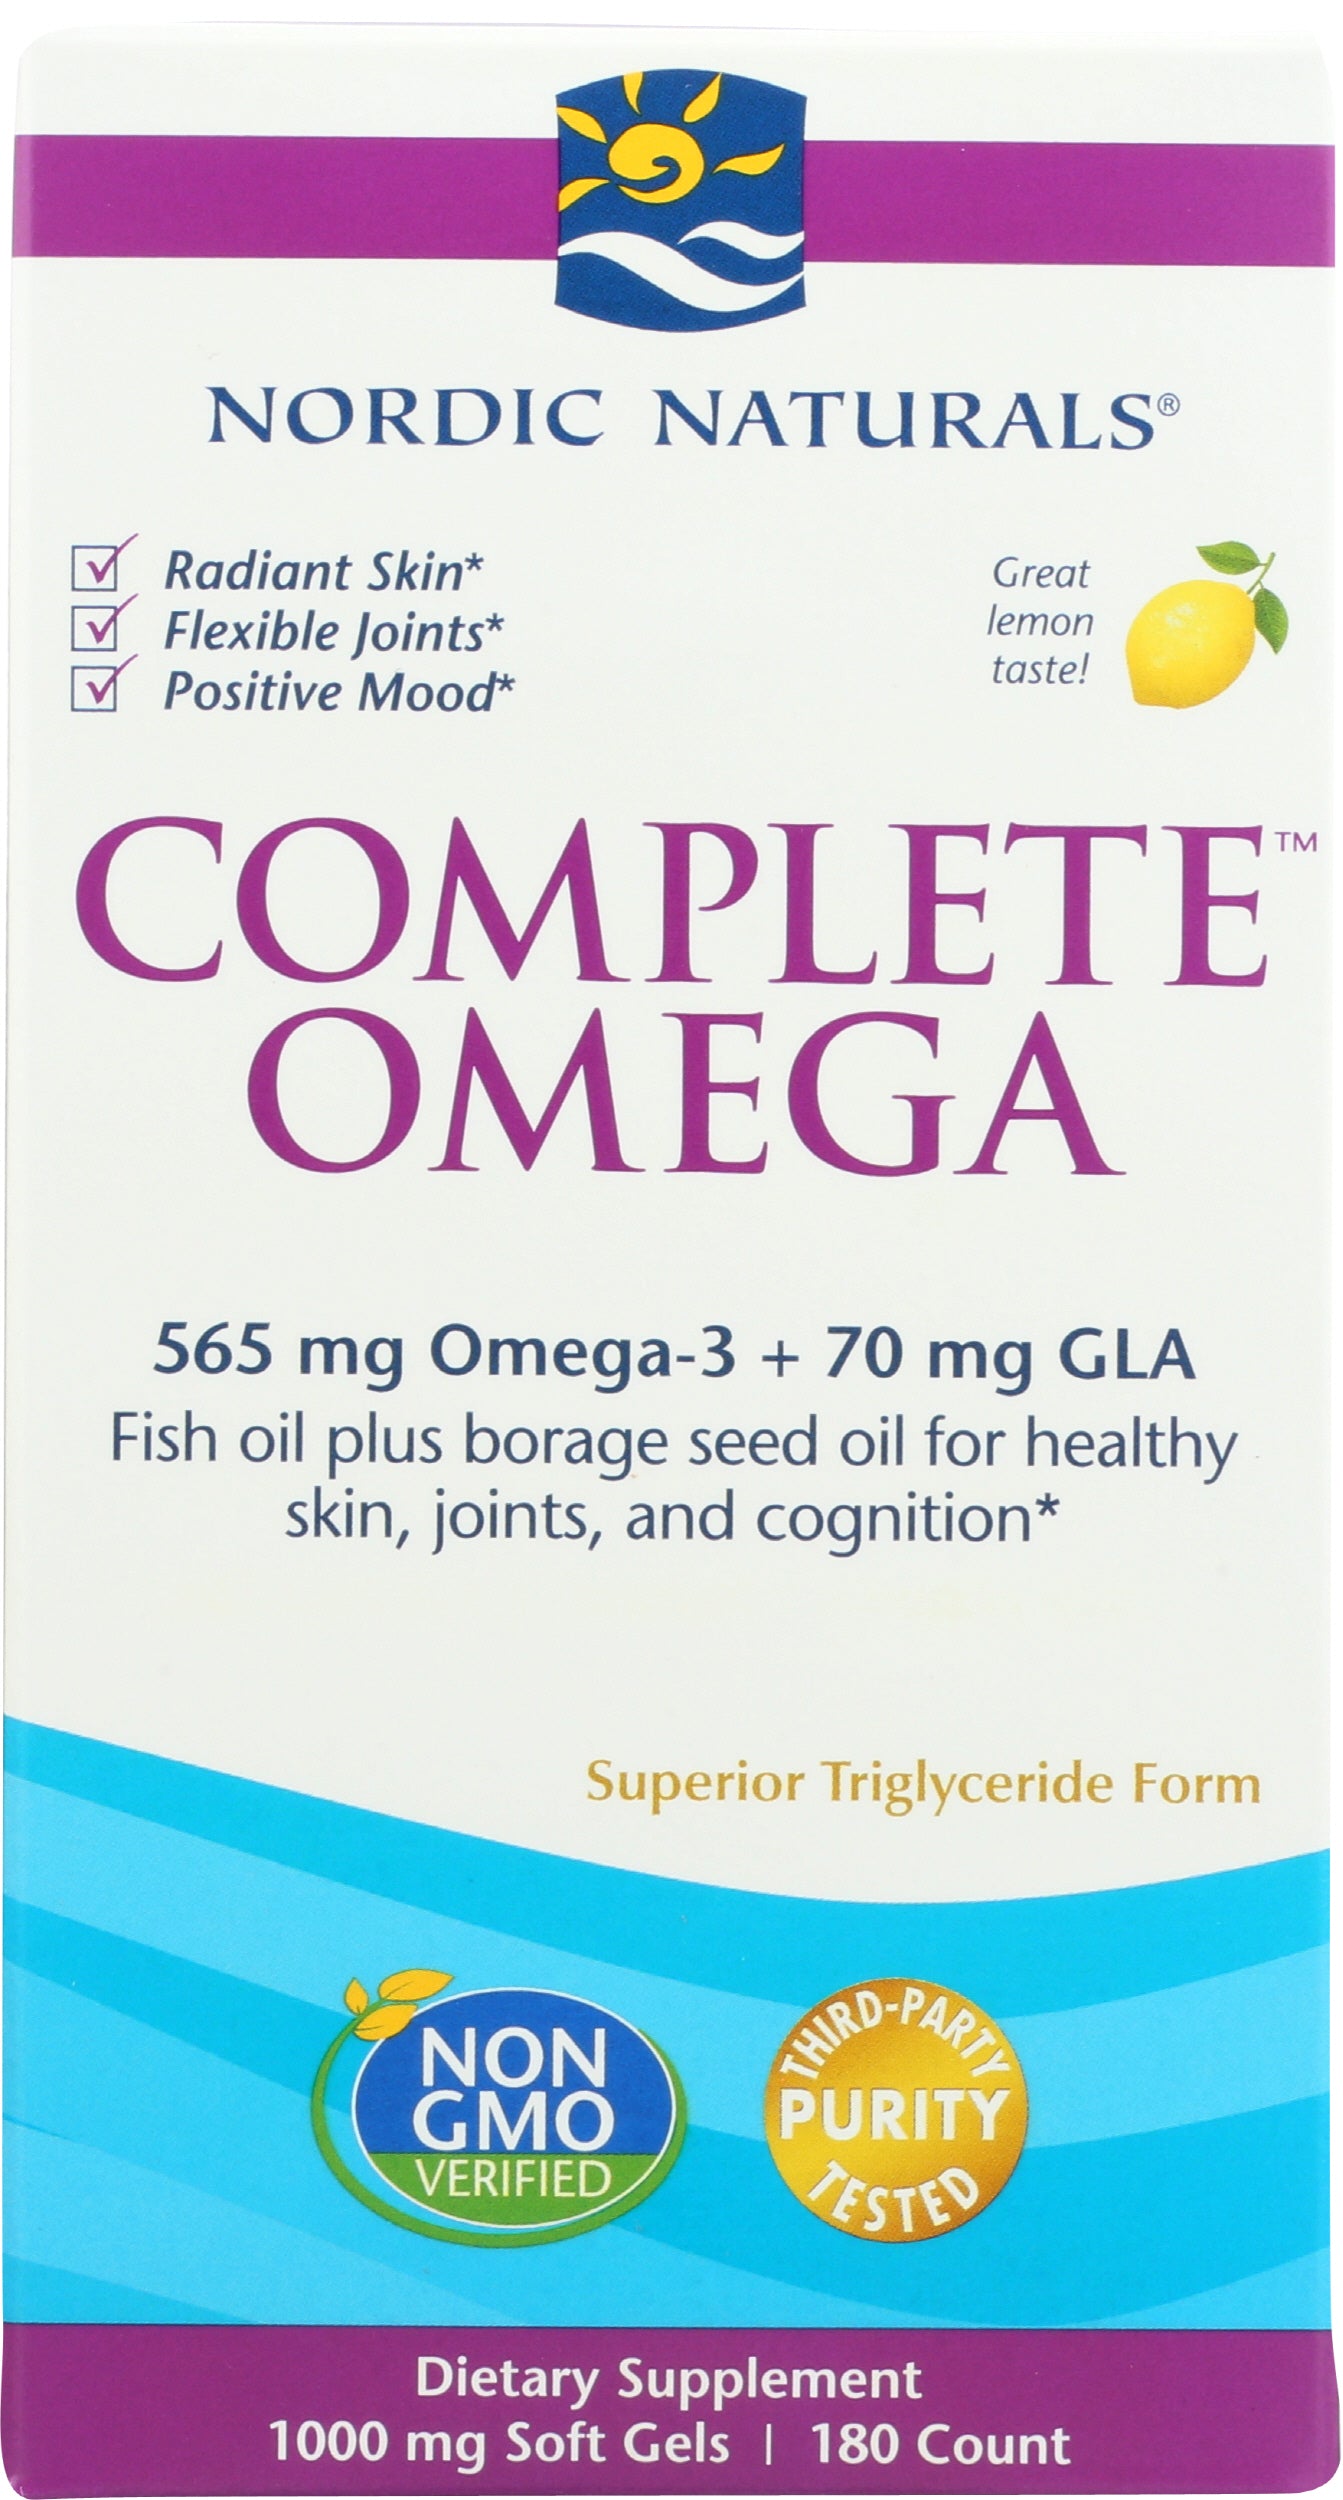 Nordic Naturals Complete Omega 565 mg + 70 mg GLA  Front of Box